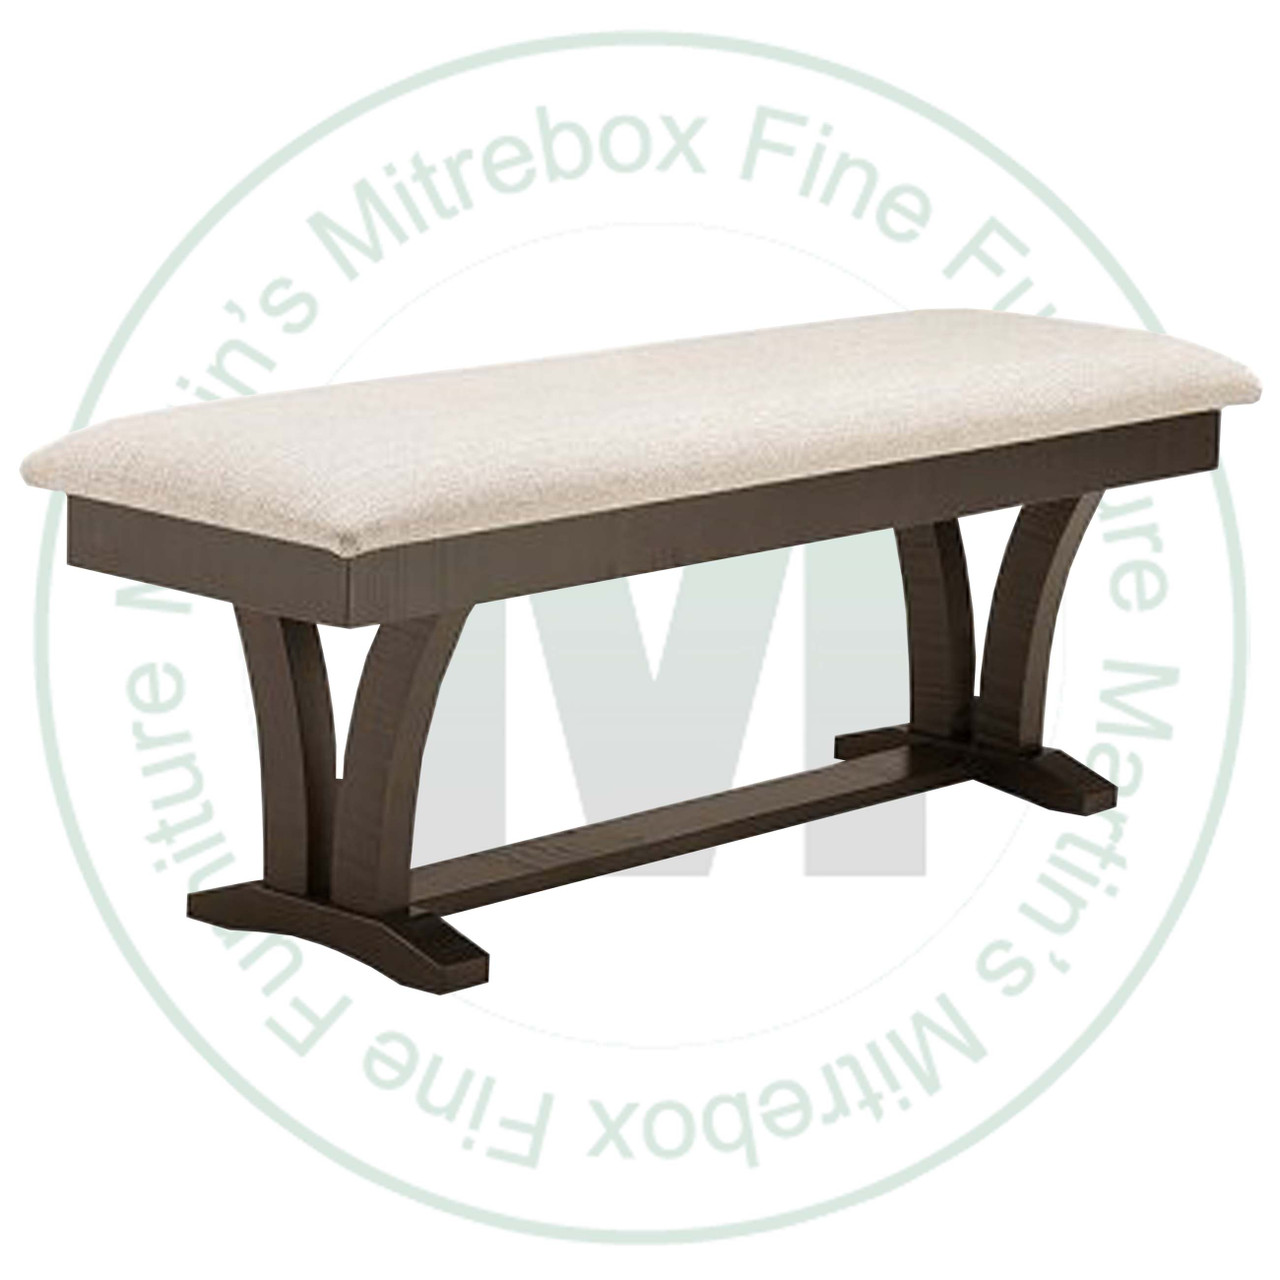 Maple Bancroft Bench 16''D x 48''W x 18''H With Fabric Seat